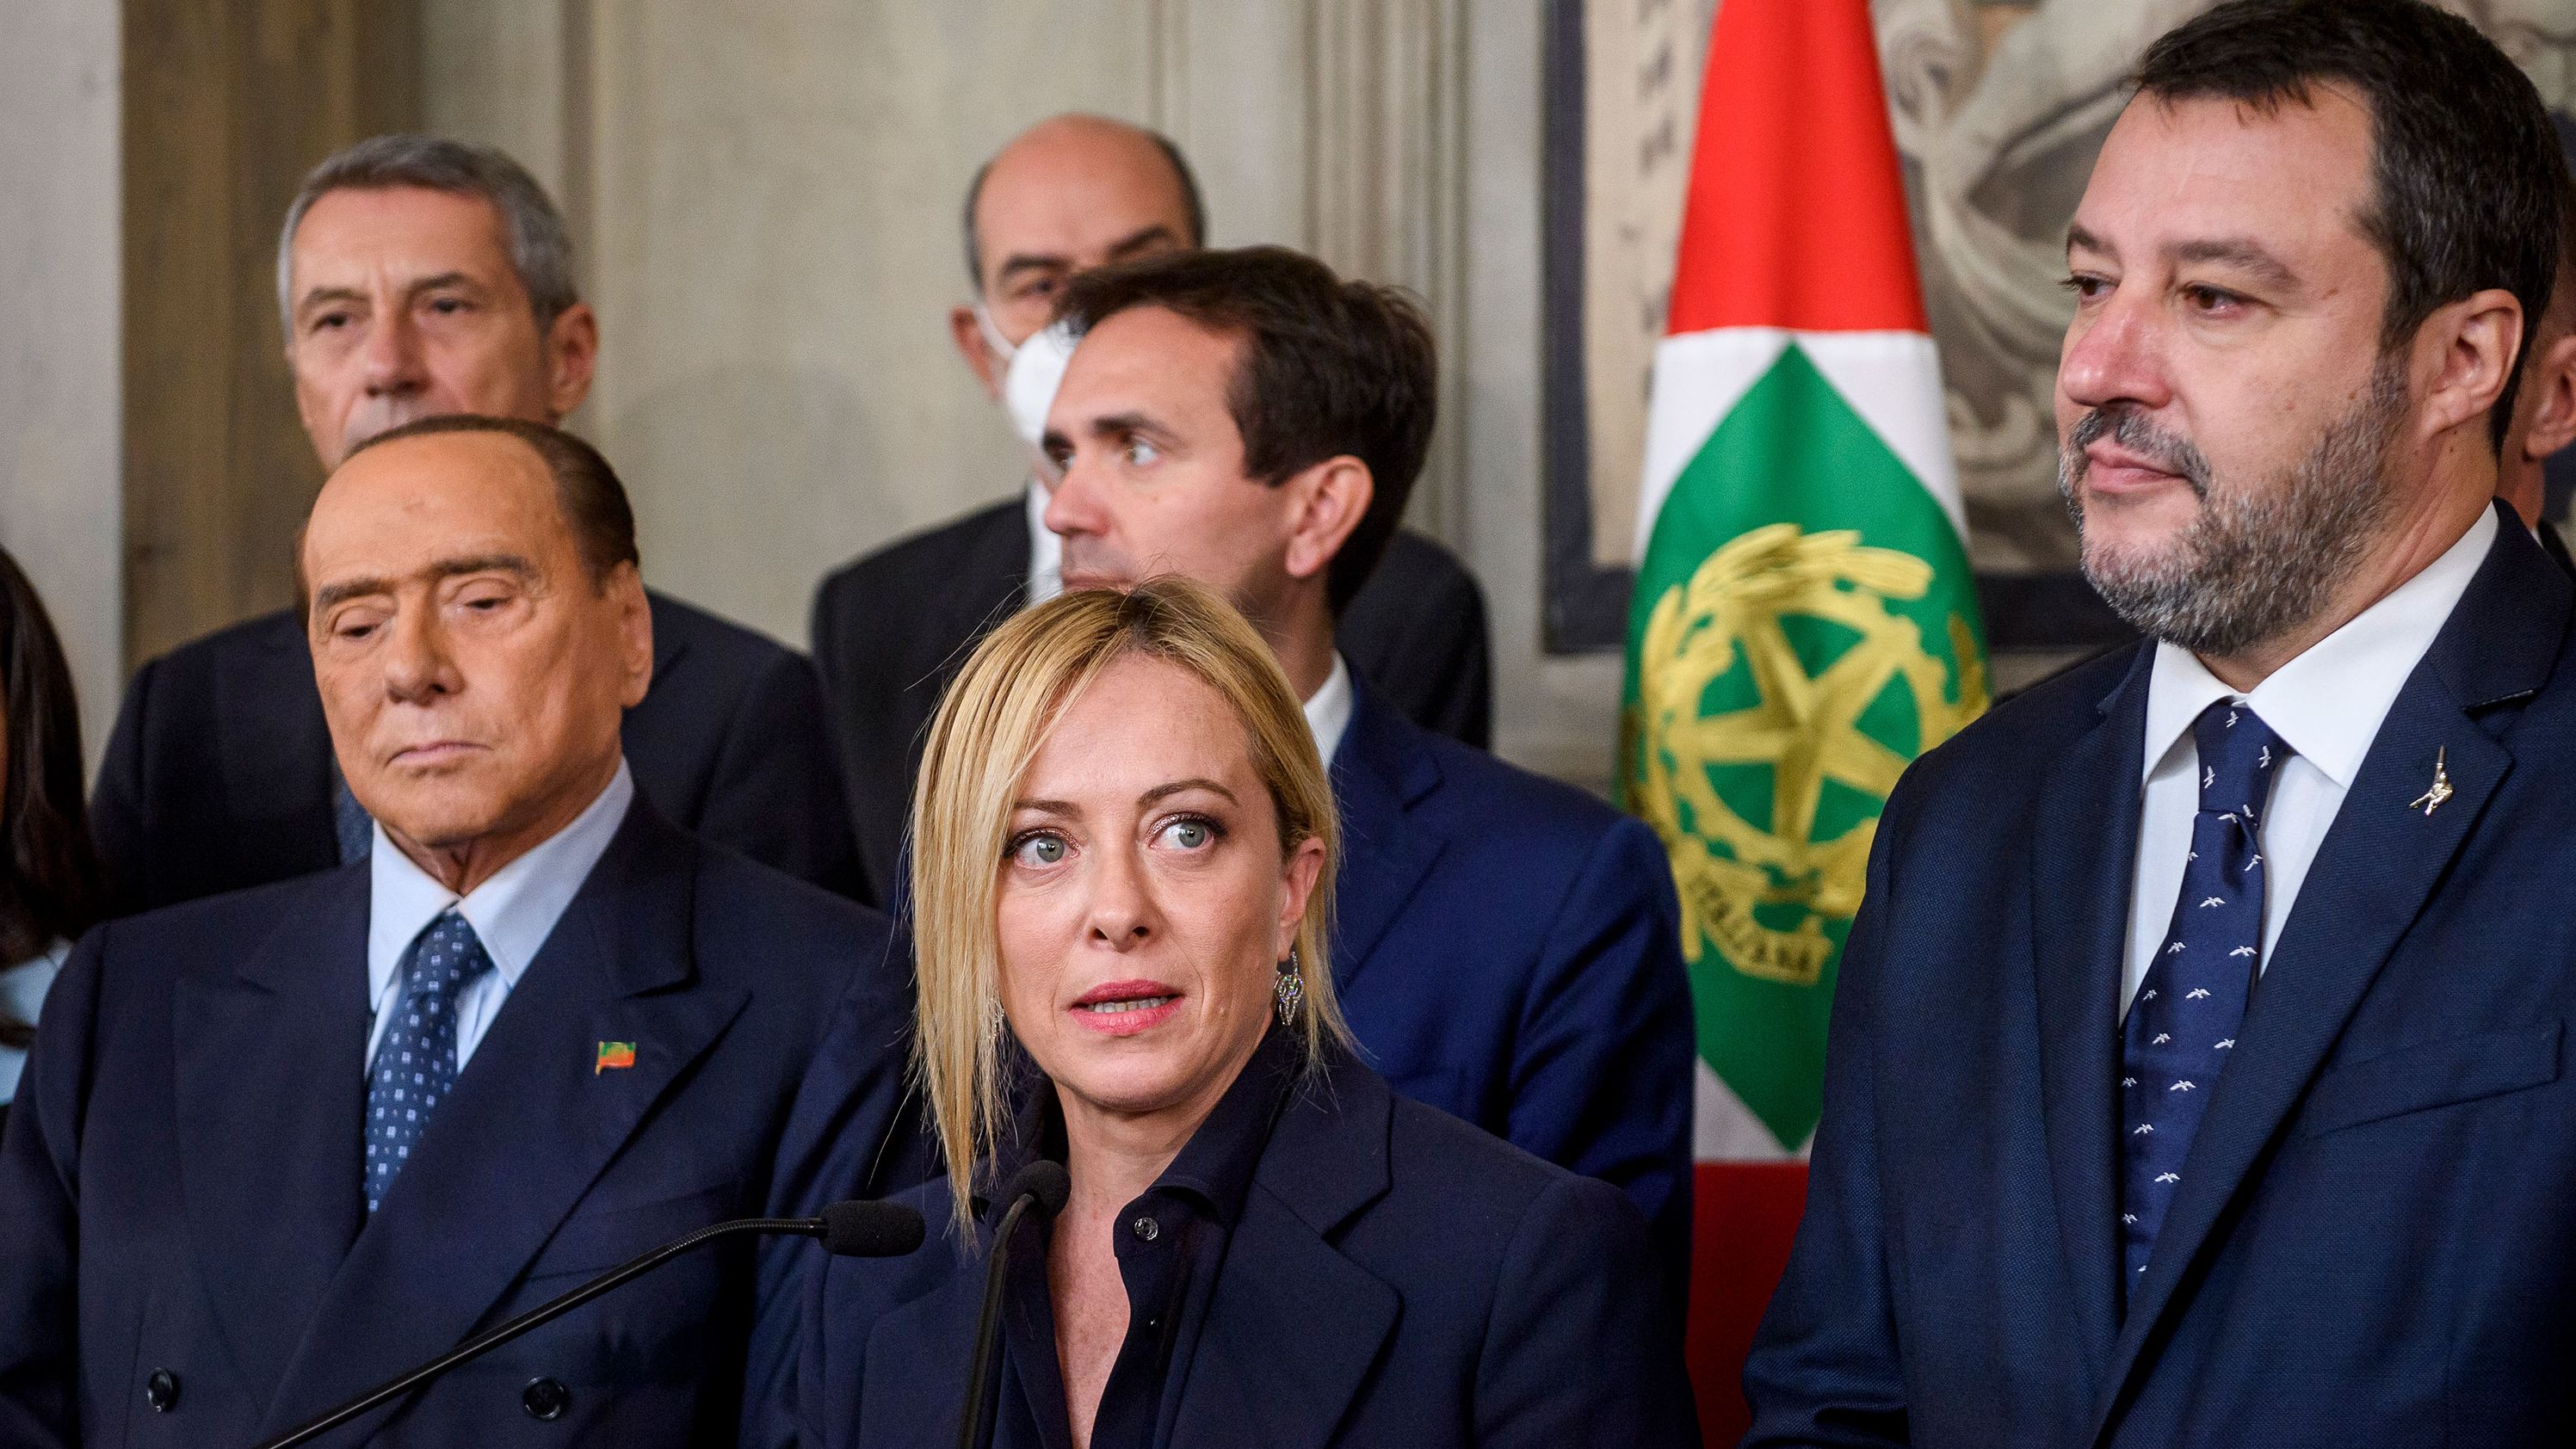 Silvio Berlusconi (left) and Matteo Salvini (right) are expected to be part of Meloni's Cabinet, which will see one of Italy's most far-right governments in recent history. 